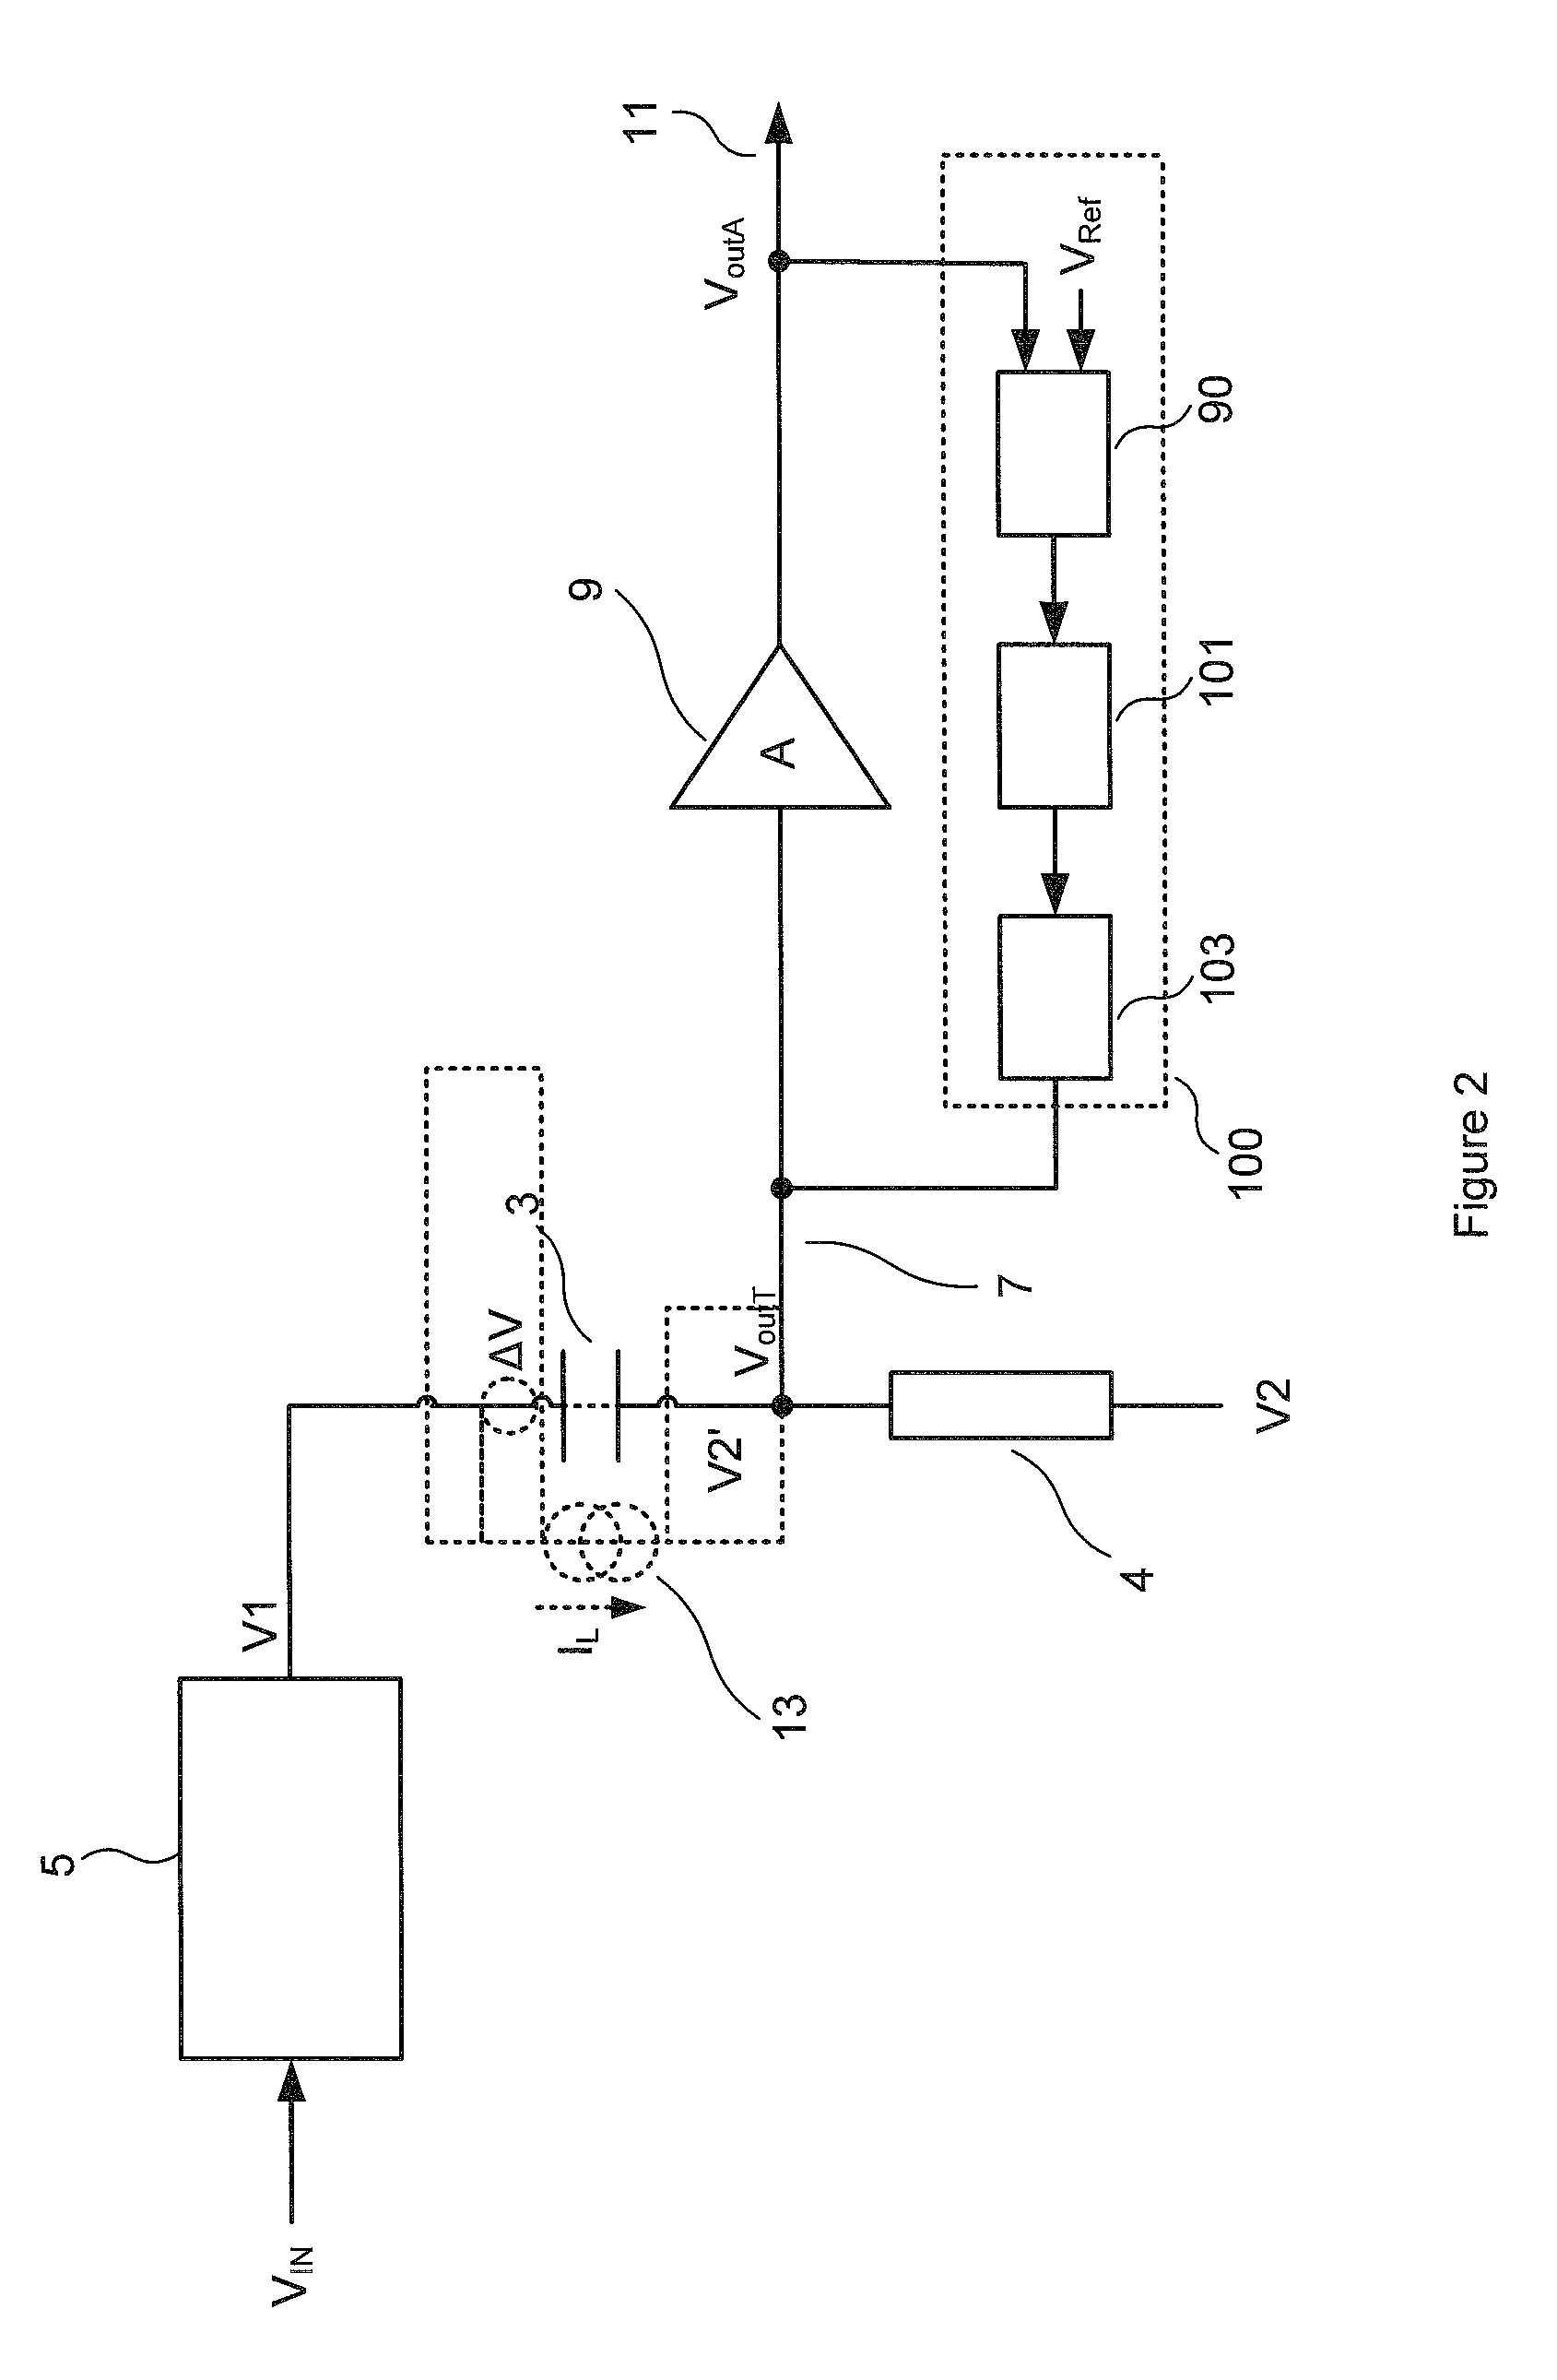 Capacitive transducer circuit and method